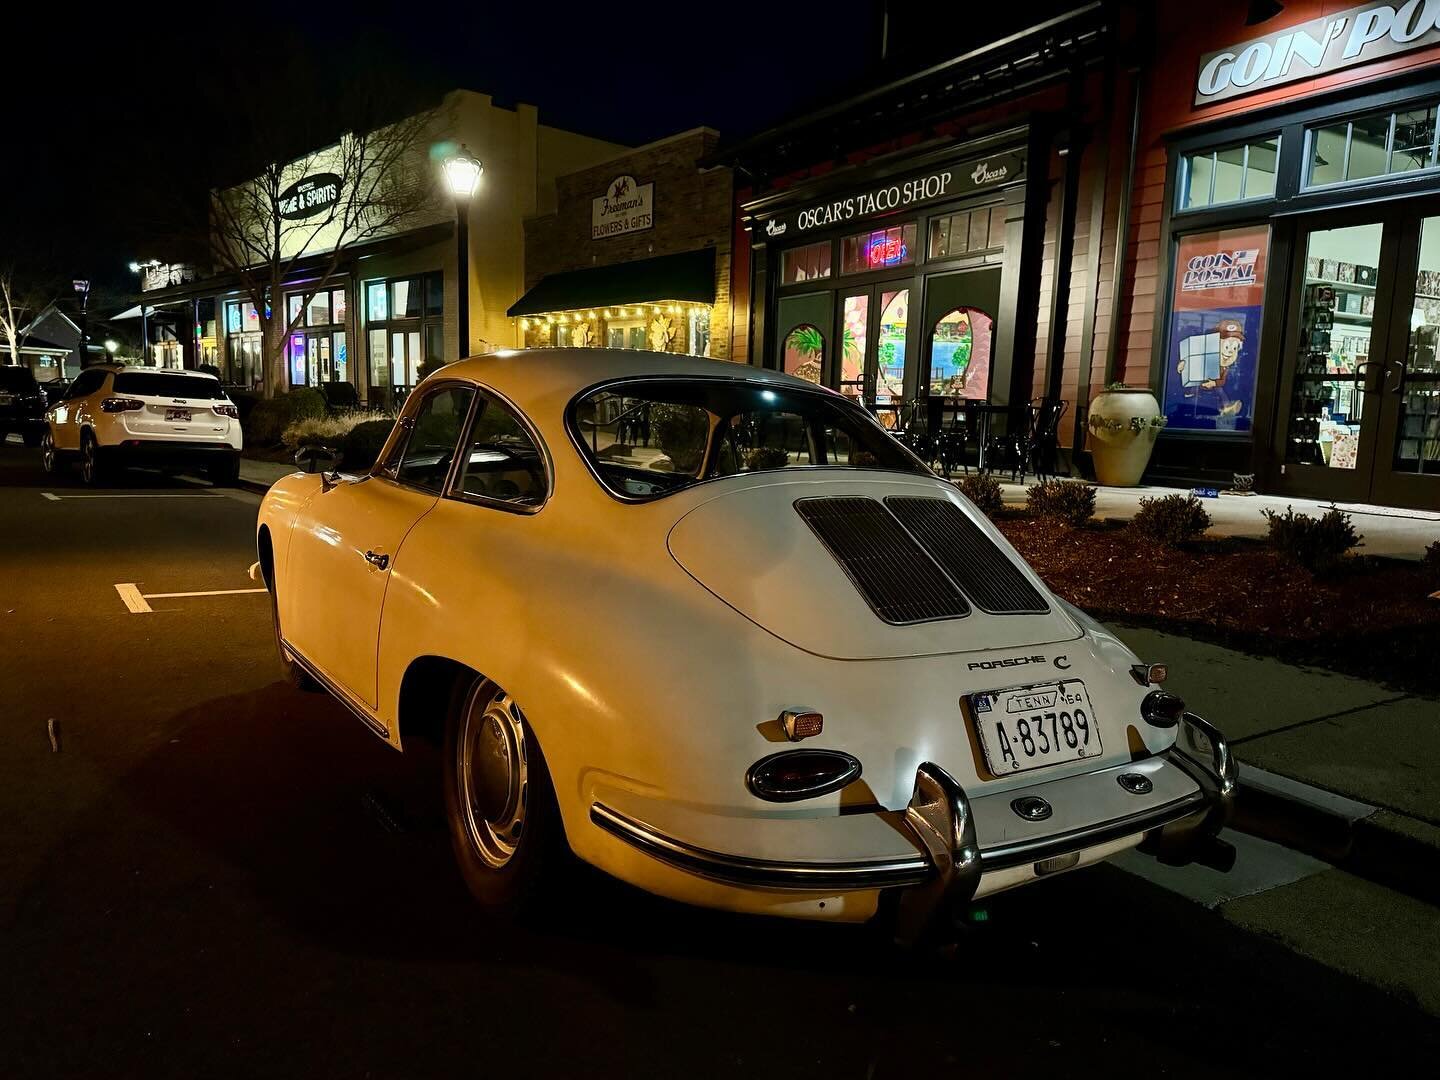 Came to West Haven @coaltownpublichouse to see our good friend @kennypcleveland put on a show and hang with his family. Good times.
&bull;
&bull;
&bull;
#Localmusic #westhaven #coaltownpublichouse #porsche #356 #356c #aircooled #flatfour #classic